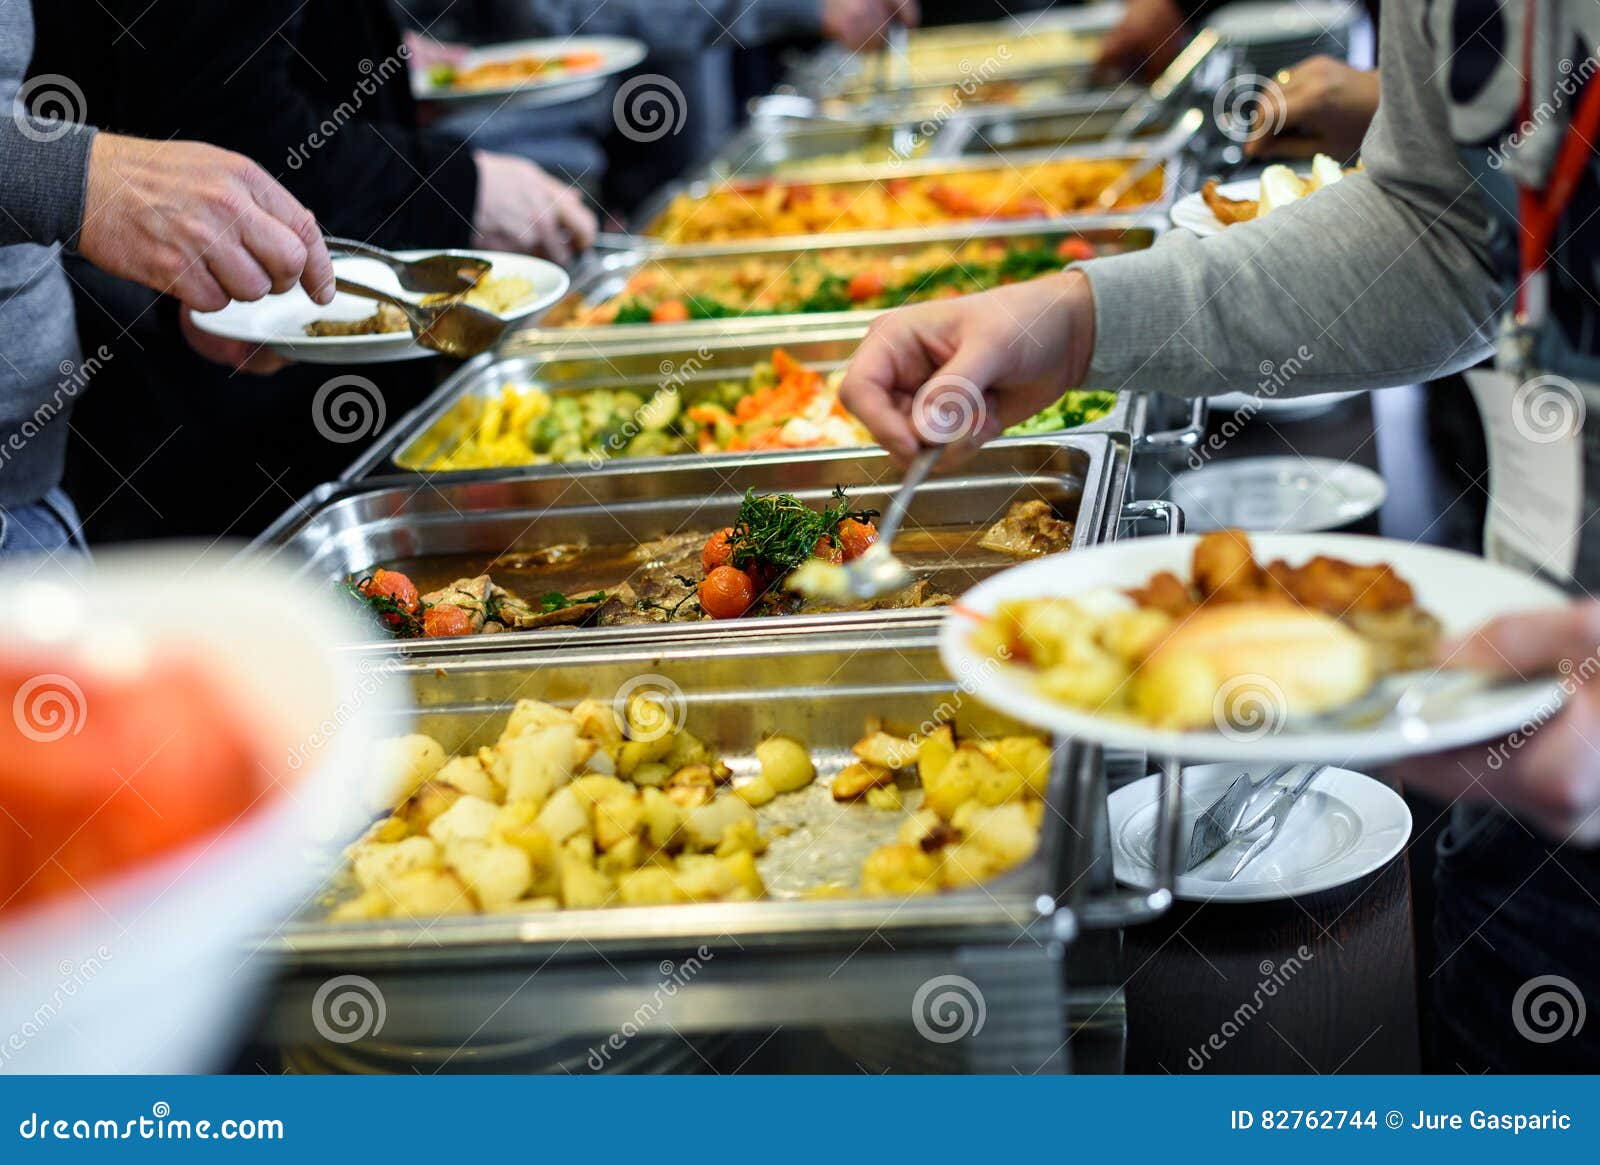 cuisine culinary buffet dinner catering dining food celebration